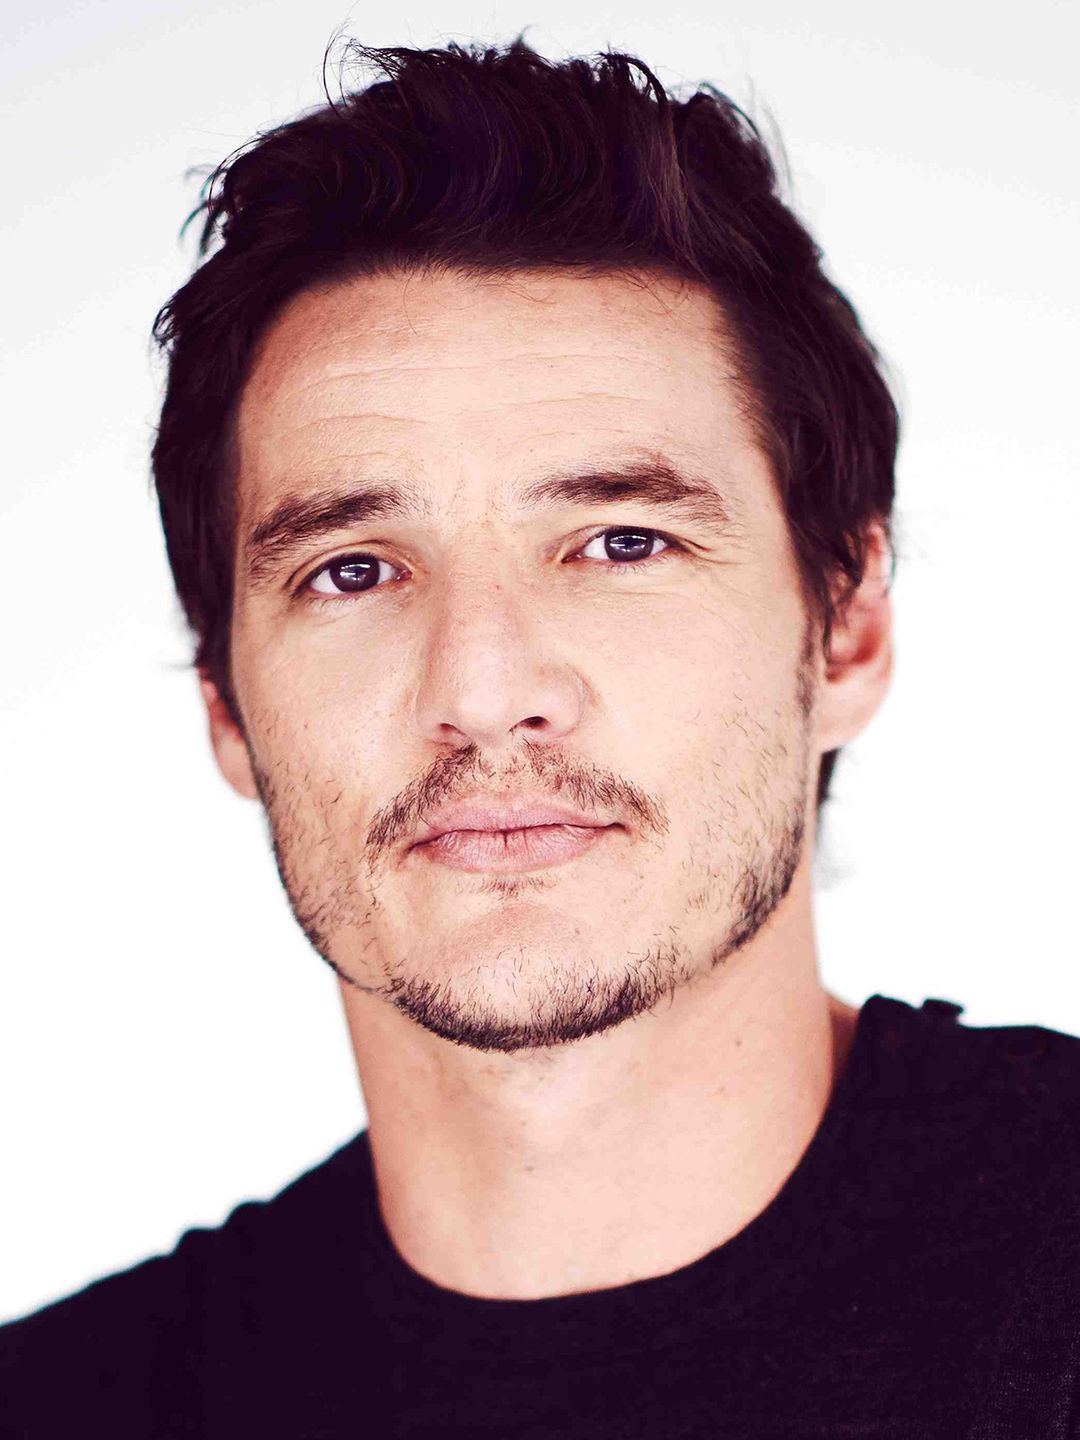 Pedro Pascal current look